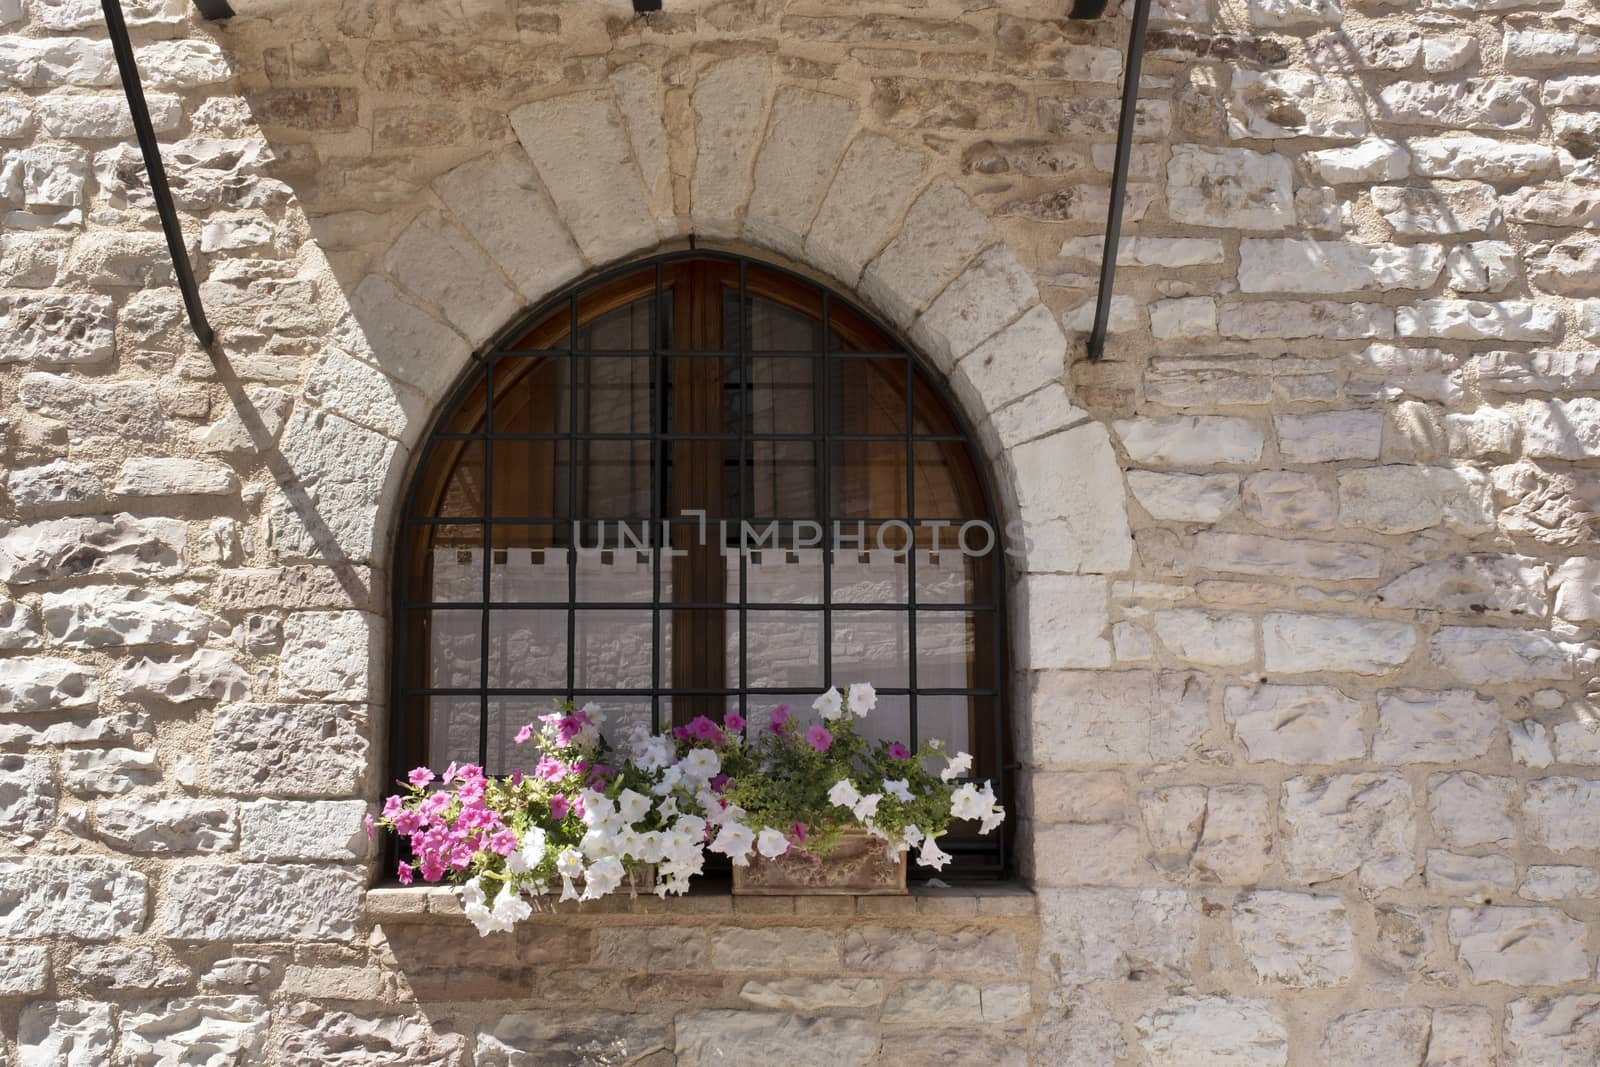 A basket of bright pink and red flowers hangs on the window of a home in an ancient building in Italy by Tjeerdkruse